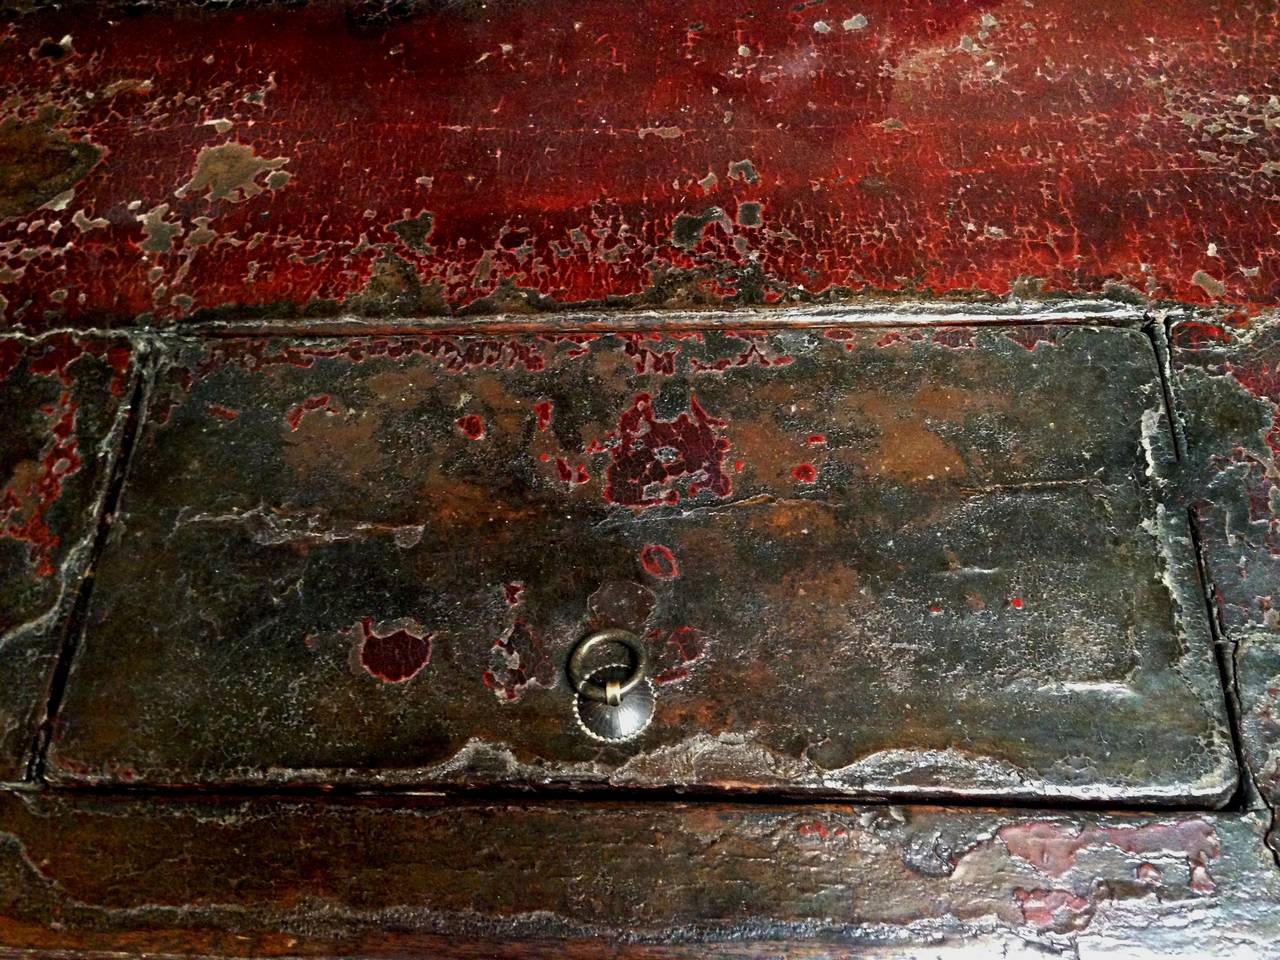 All original Mongolian chest is stunning with its extraordinary color of red. A center medallion featuring a gathered flower group symbolizing unity is of typical Mongolian style. The top has an original opening that reveals deep interior capacity